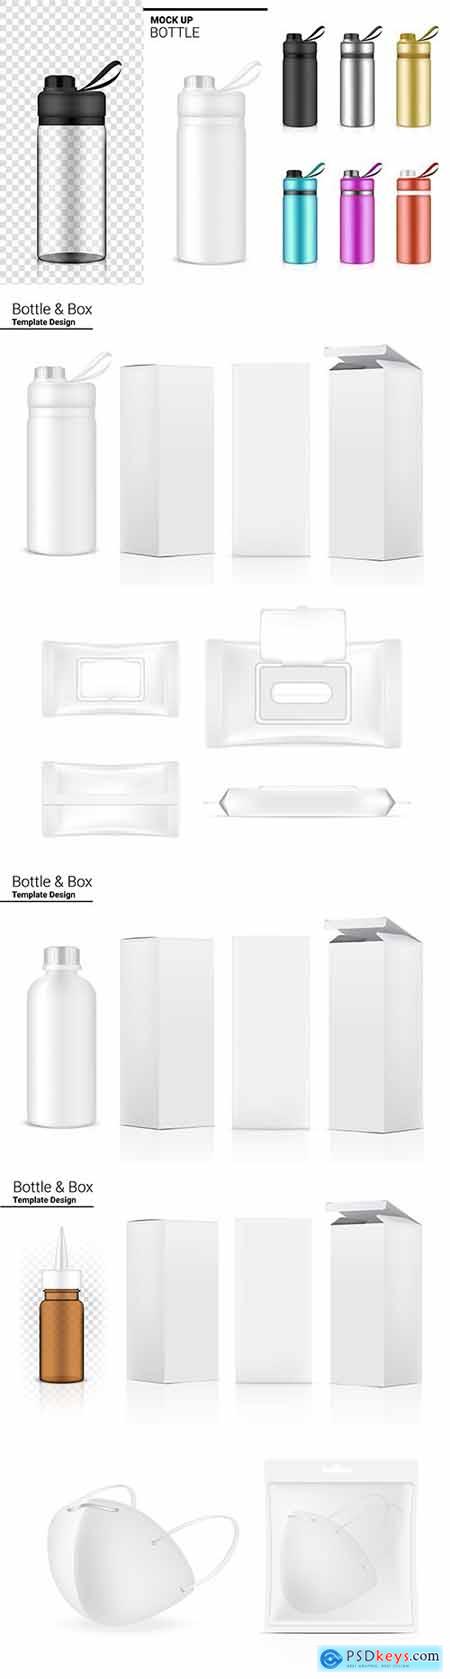 Bottle and packaging 3d realistic template design